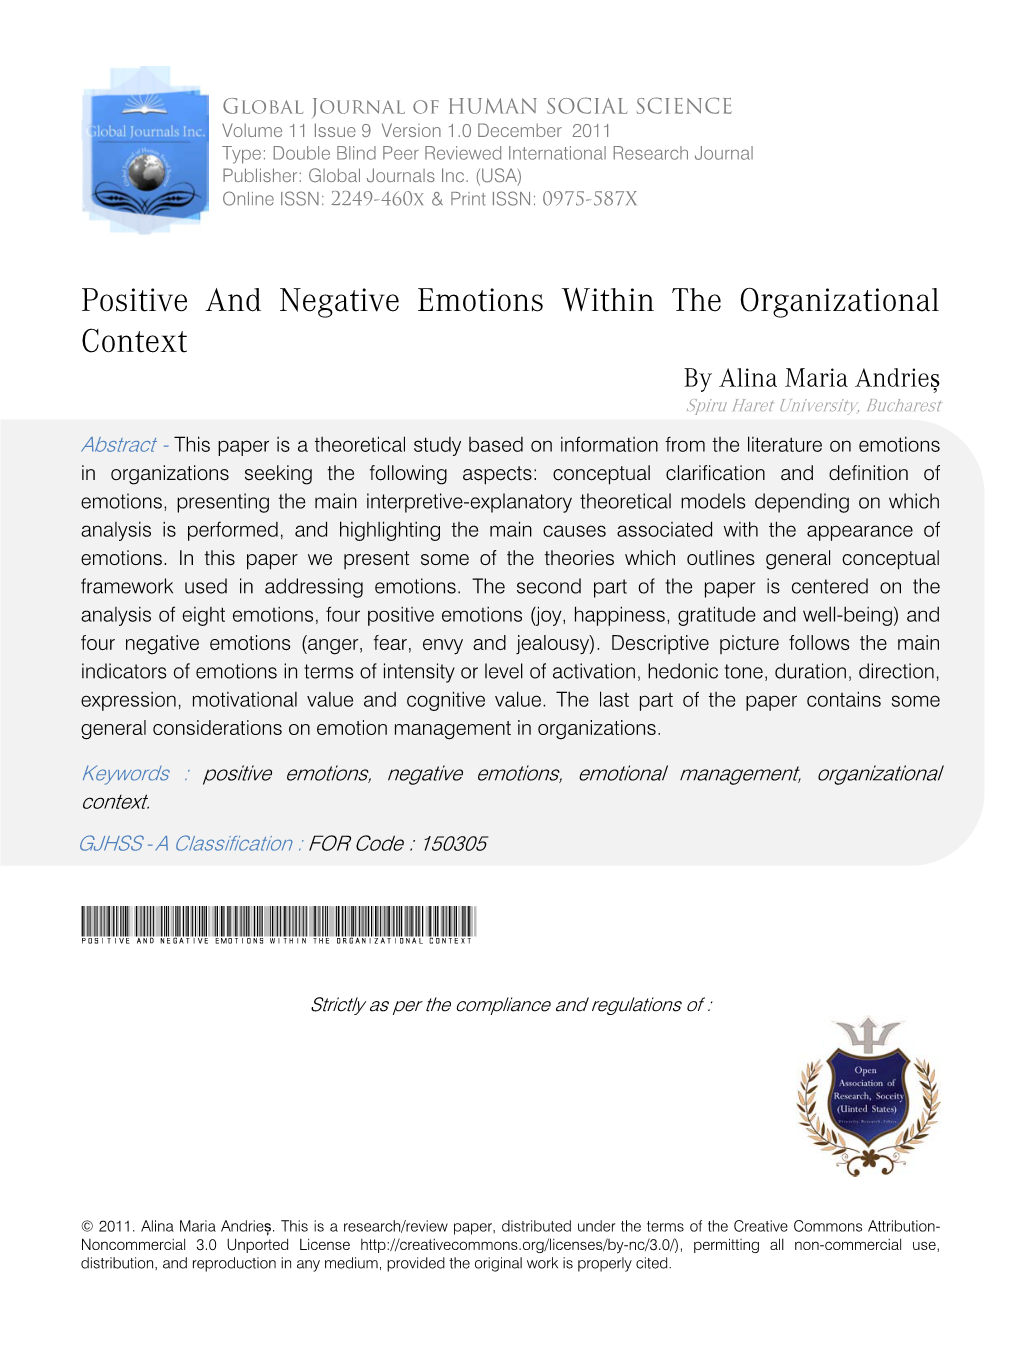 Positive and Negative Emotions Within the Organizational Context by Alina Maria Andrieș Spiru Haret University, Bucharest